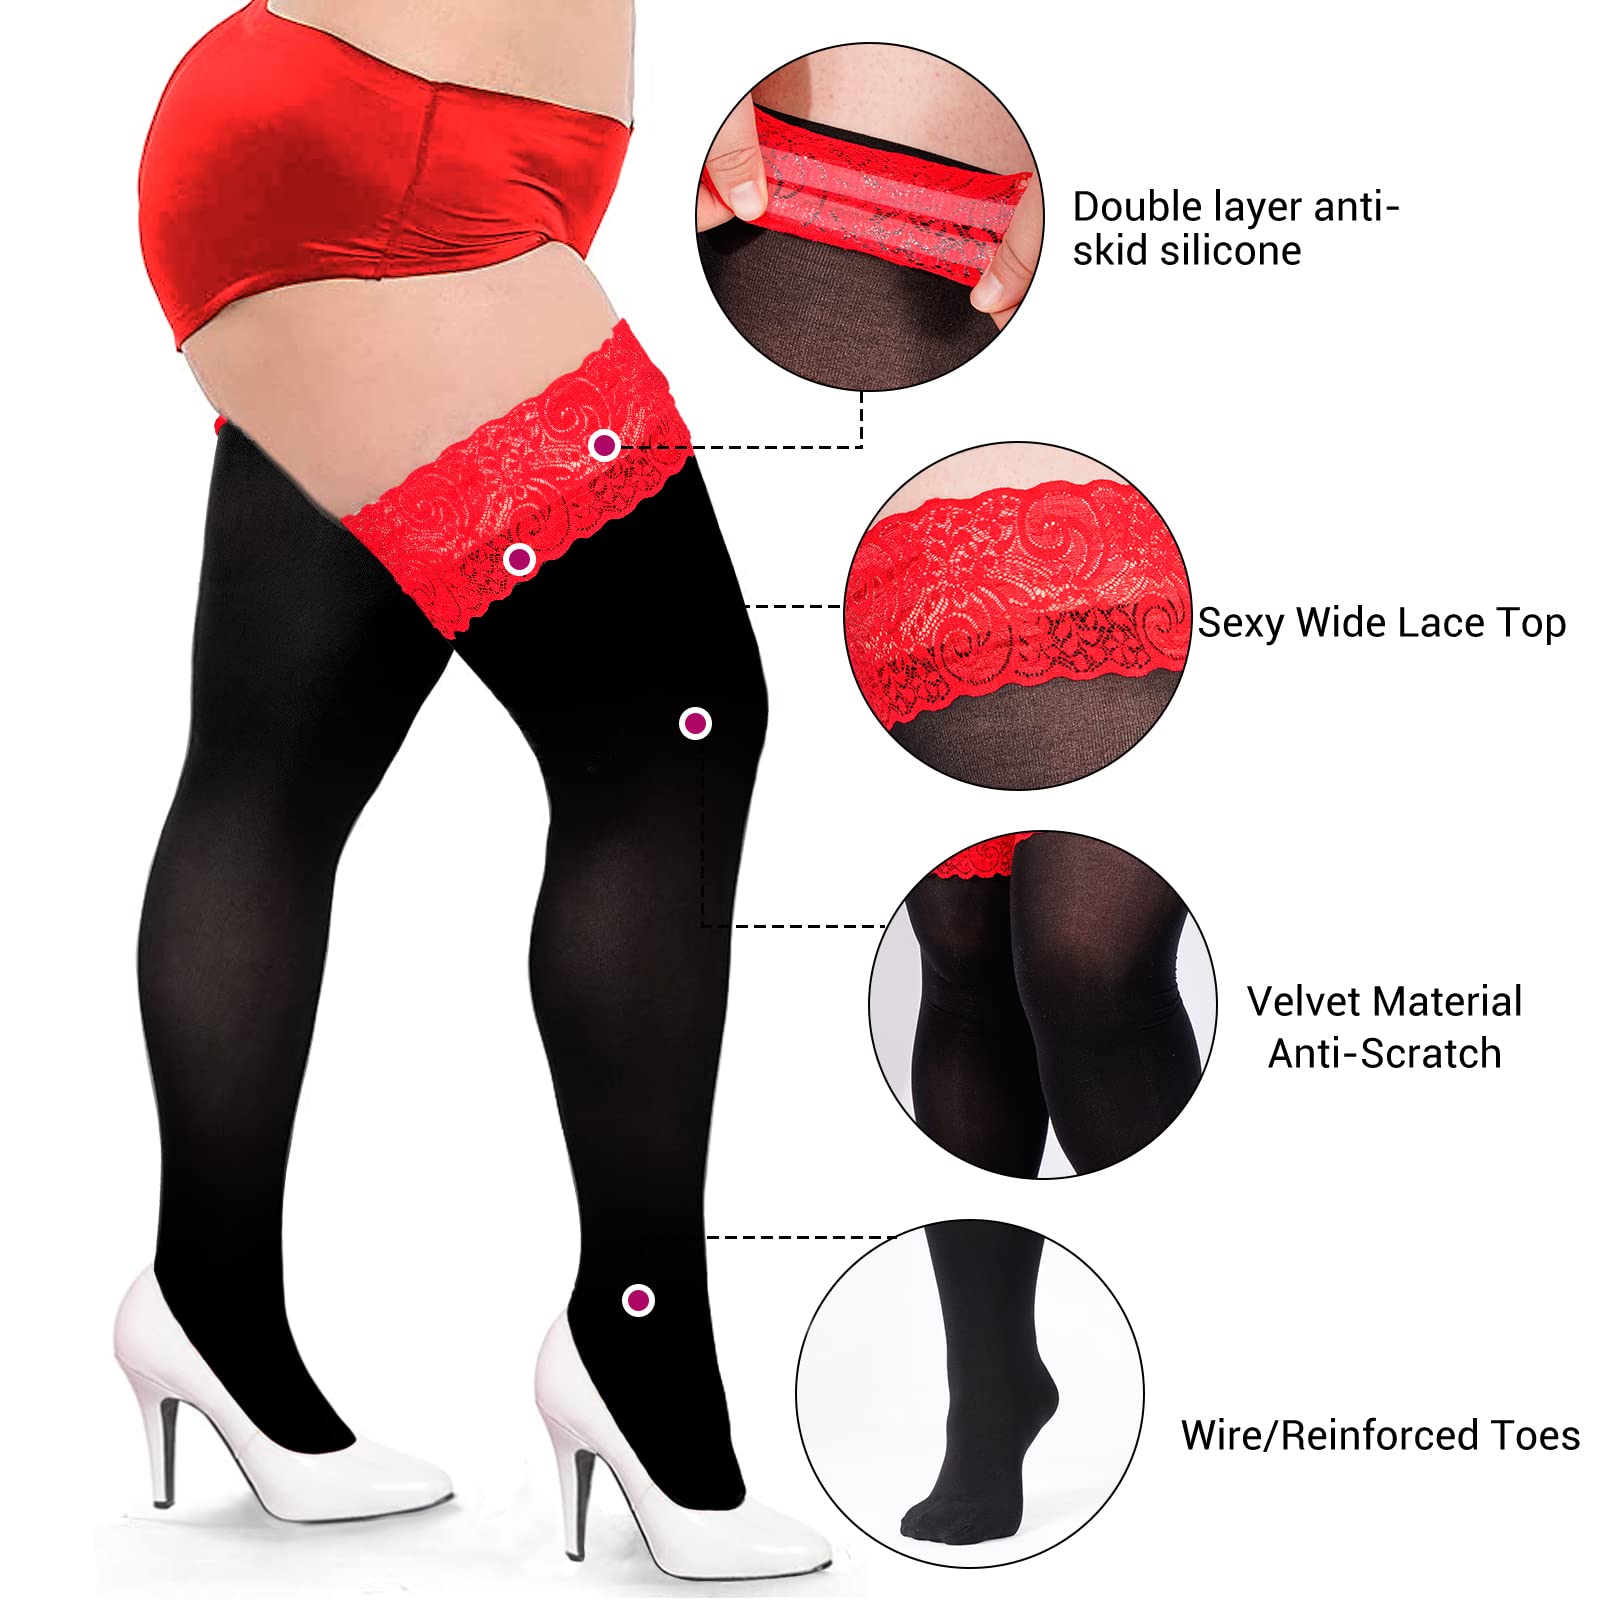 55D Semi Sheer Silicone Lace Stay Up Thigh Highs Pantyhose-Black & Red Lace - Moon Wood